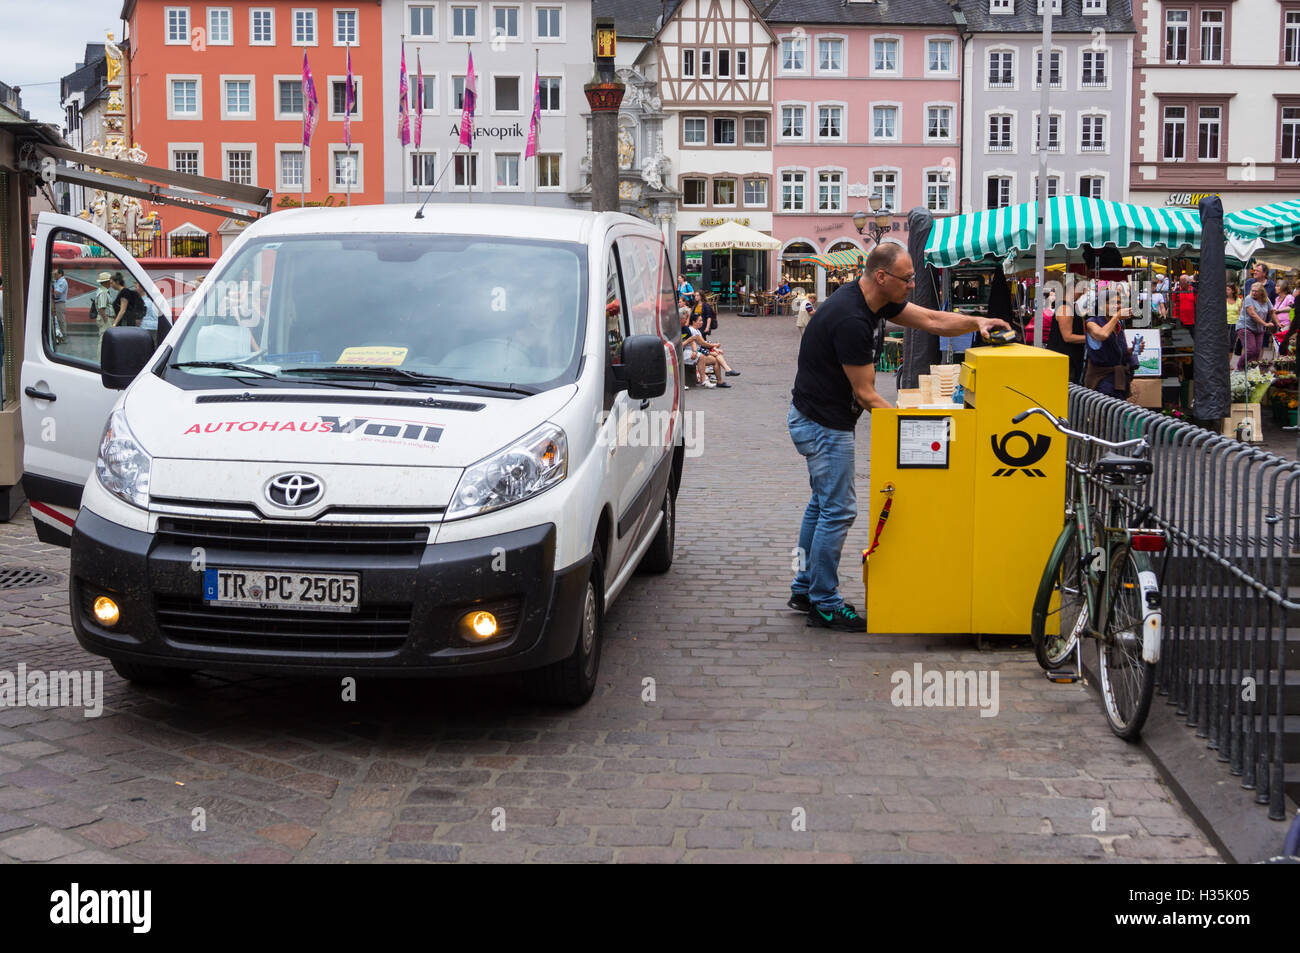 A contractor in a hired Toyota van collecting Deutsche Post mail, Hauptmarkt, market place, Trier, Rheinland-Pfalz, Germany -Trèves Stock Photo